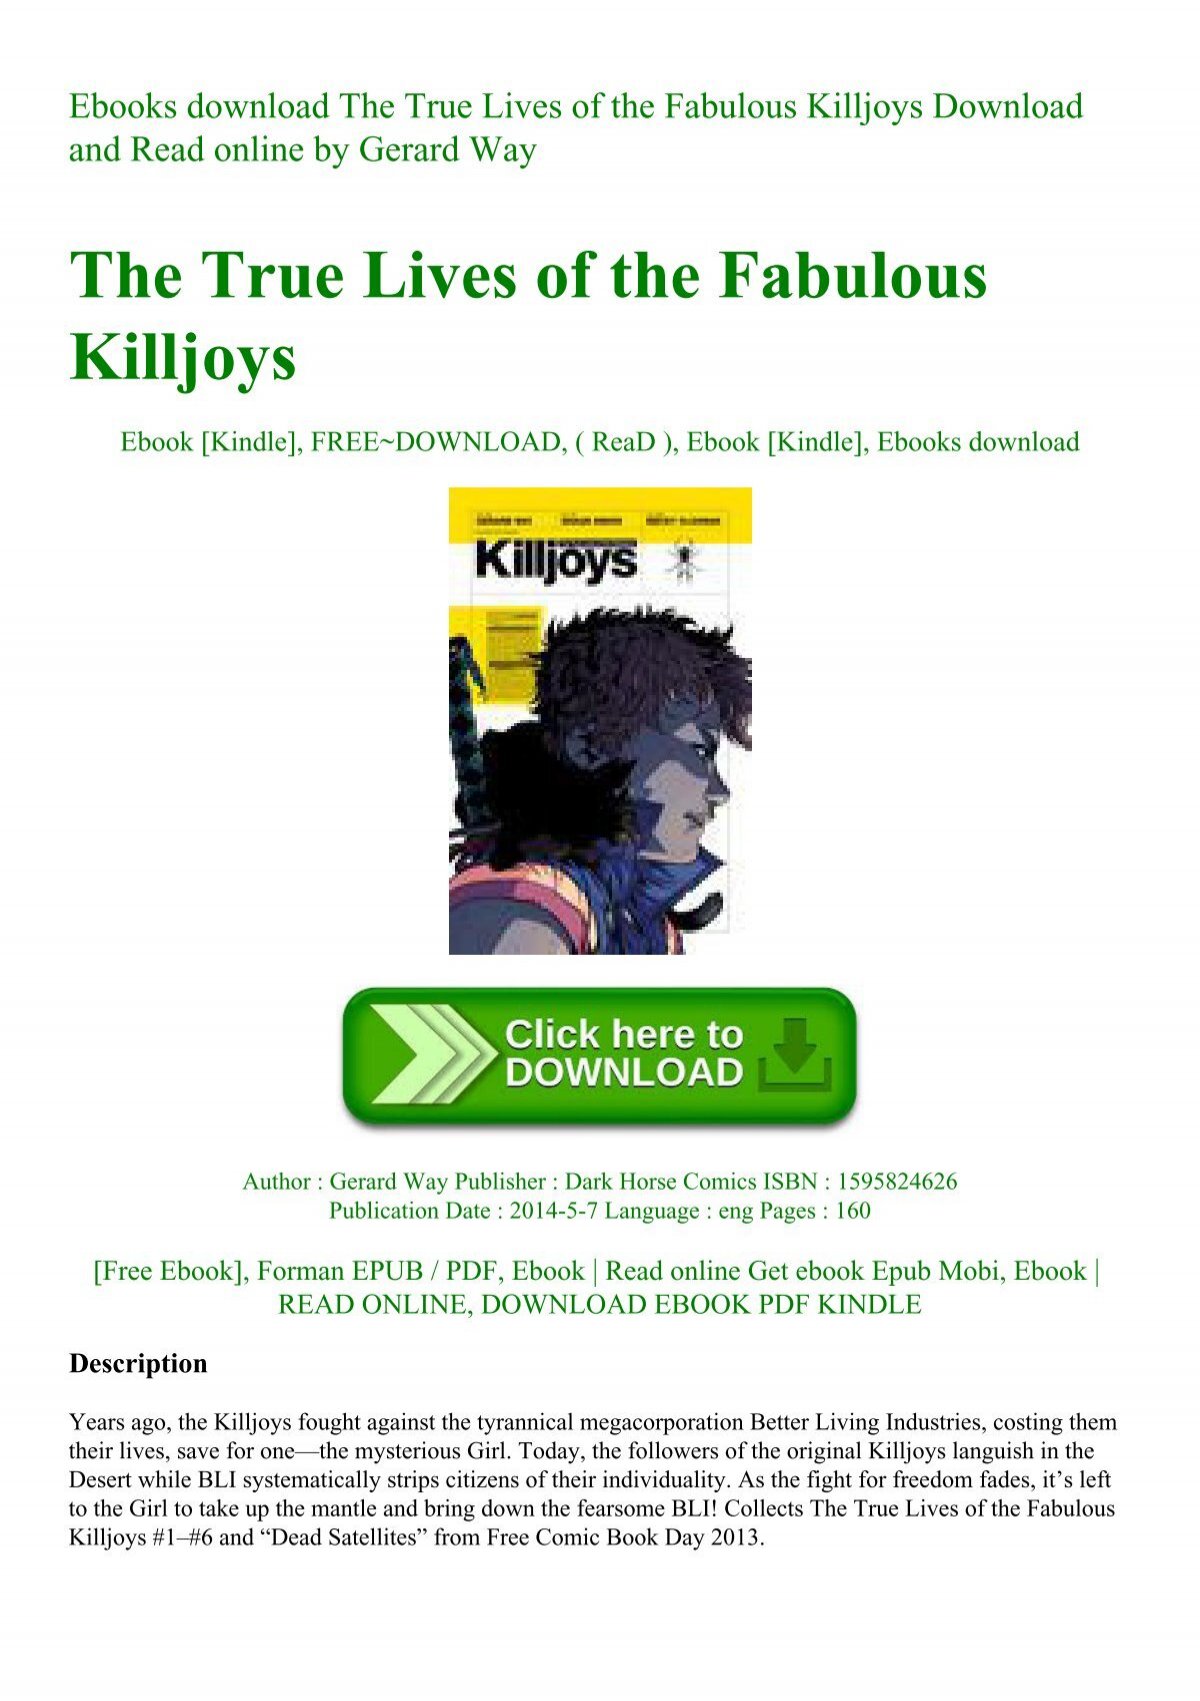 Ebooks Download The True Lives Of The Fabulous Killjoys Download And Read Online By Gerard Way